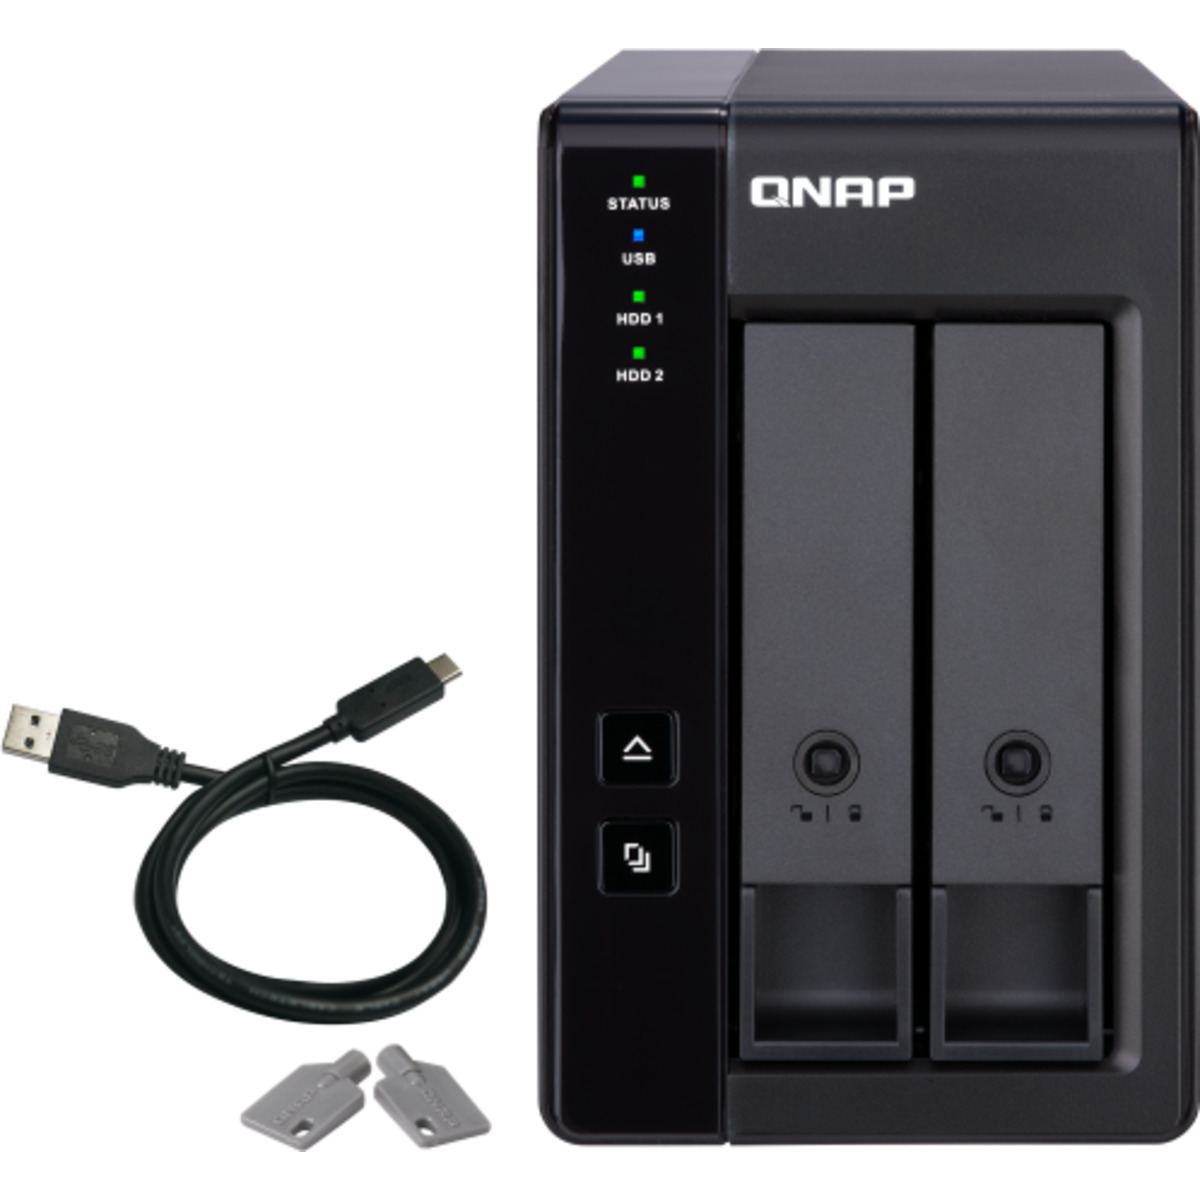 QNAP TR-002 External Expansion Drive 16tb 2-Bay Desktop Multimedia / Power User / Business Expansion Enclosure 2x8tb Western Digital Red Pro WD8003FFBX 3.5 7200rpm SATA 6Gb/s HDD NAS Class Drives Installed - Burn-In Tested TR-002 External Expansion Drive